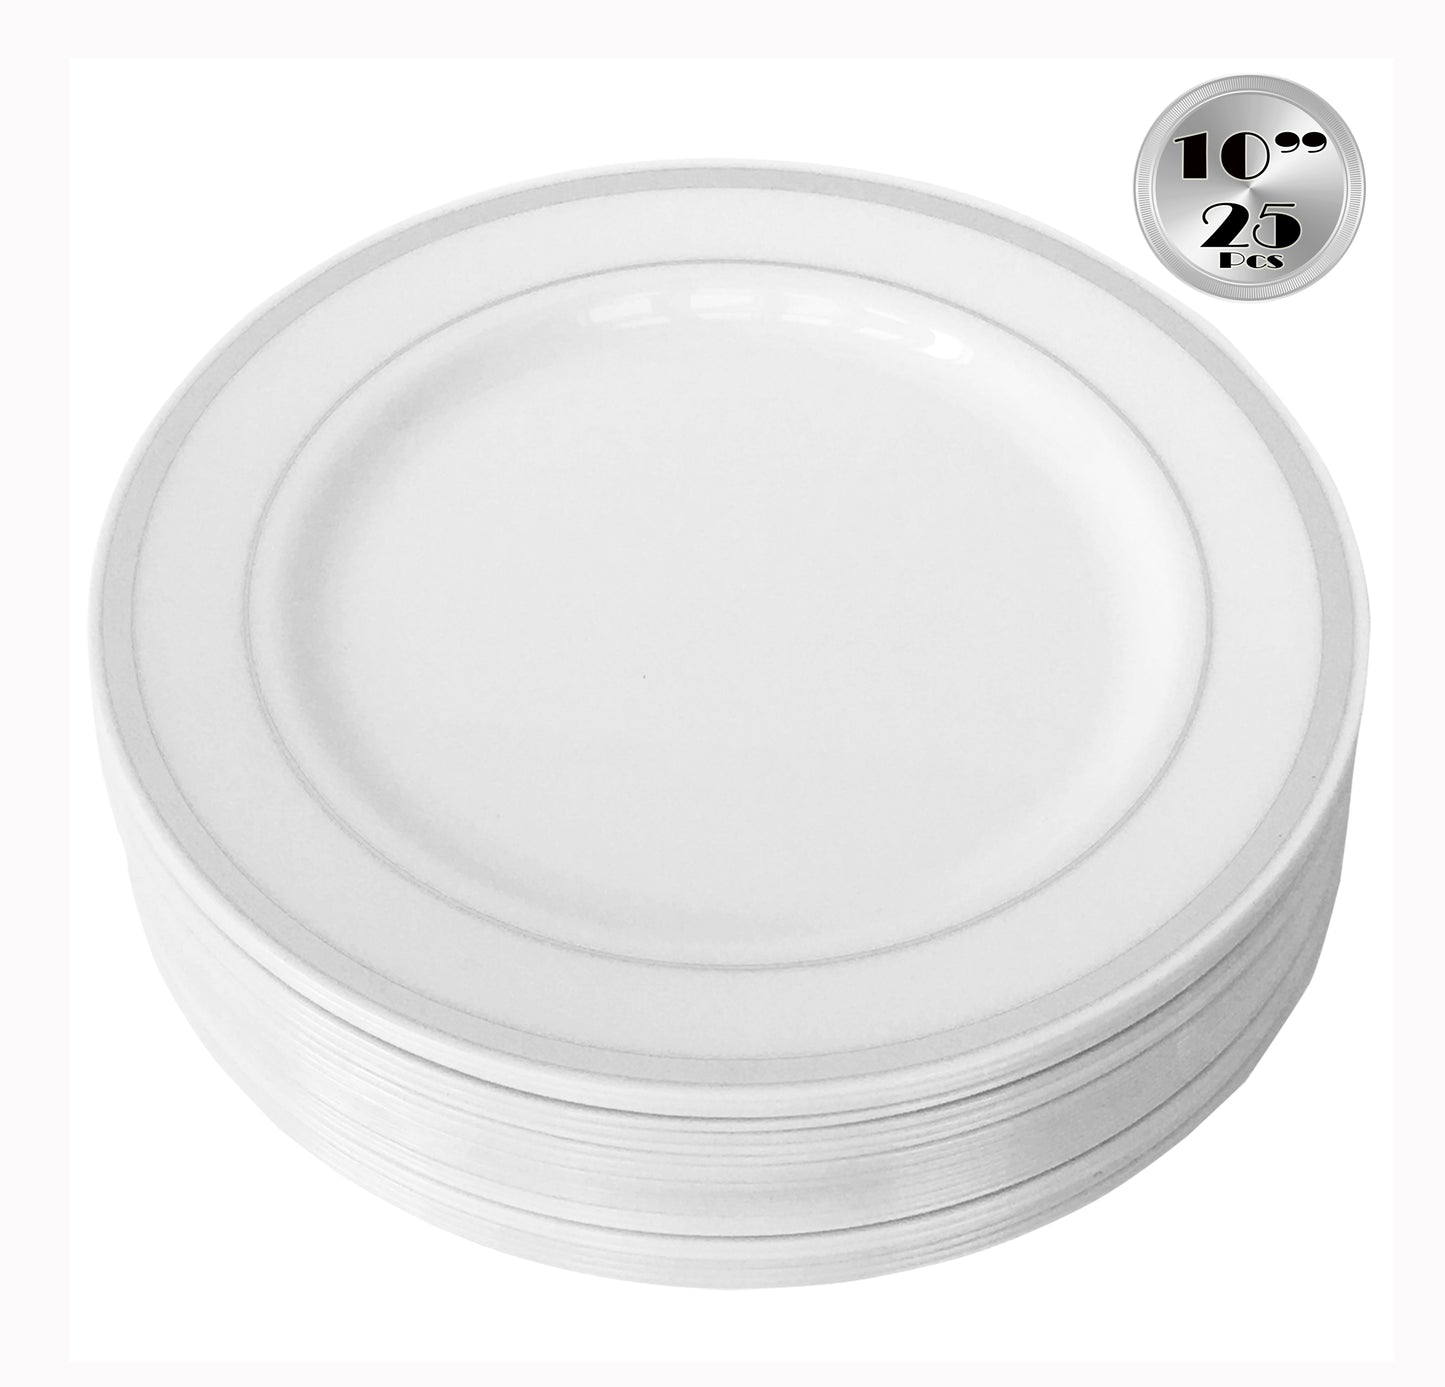 JL Prime 25 Piece 10 Inch Silver Plastic Dinner Plates Bulk Set, Heavy Duty Reusable Disposable Plastic Plates with Silver Rim for Party and Wedding